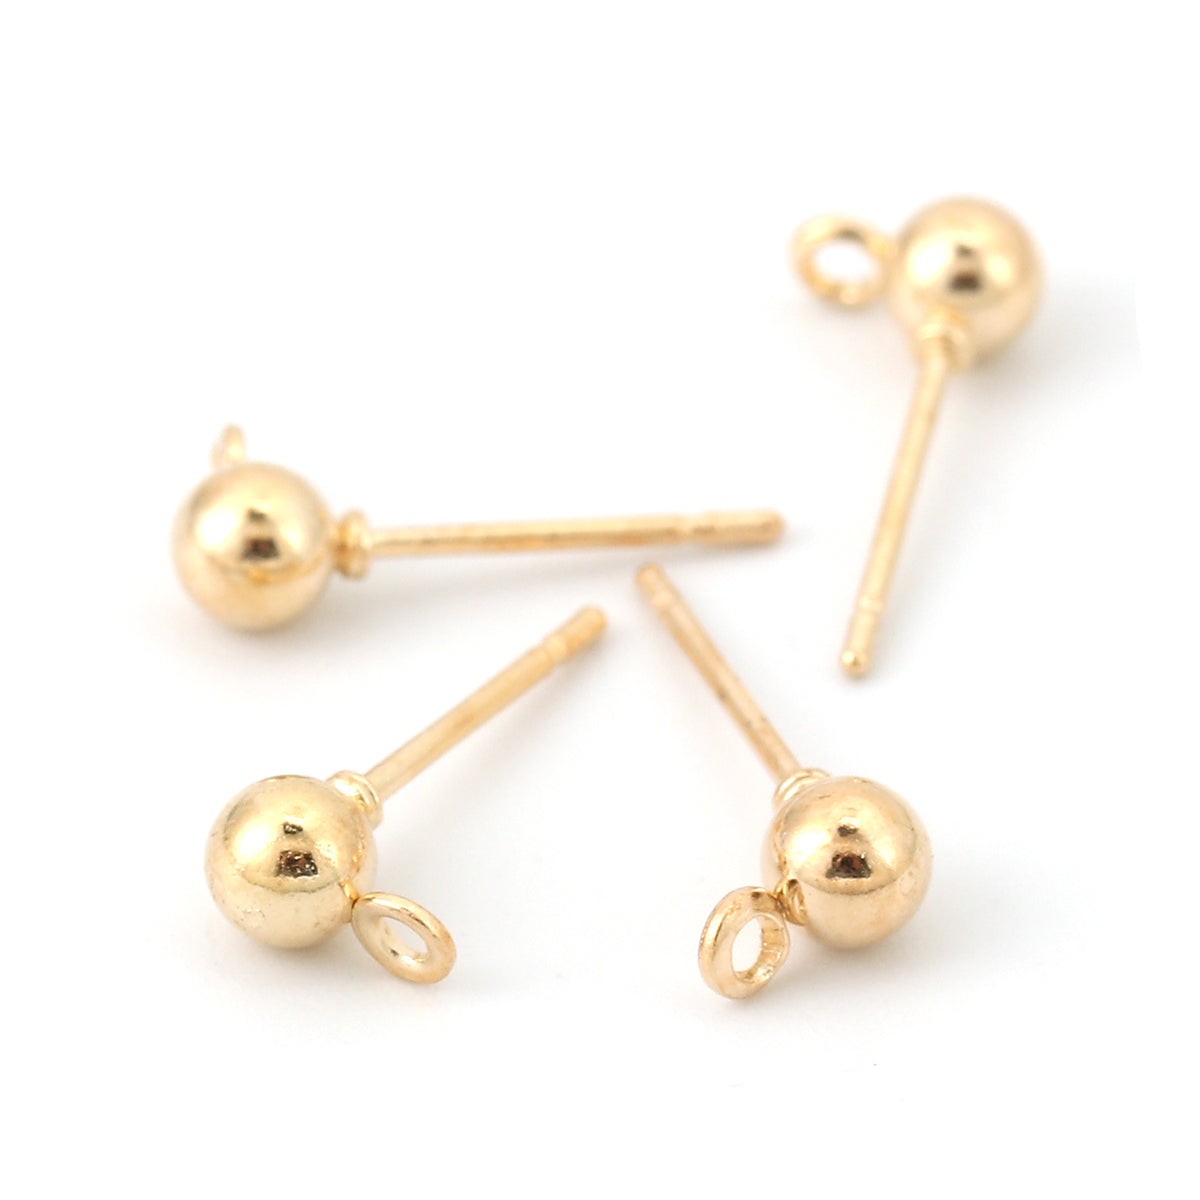 6mm Gold-Filled Earring Post Ball w/ Ring